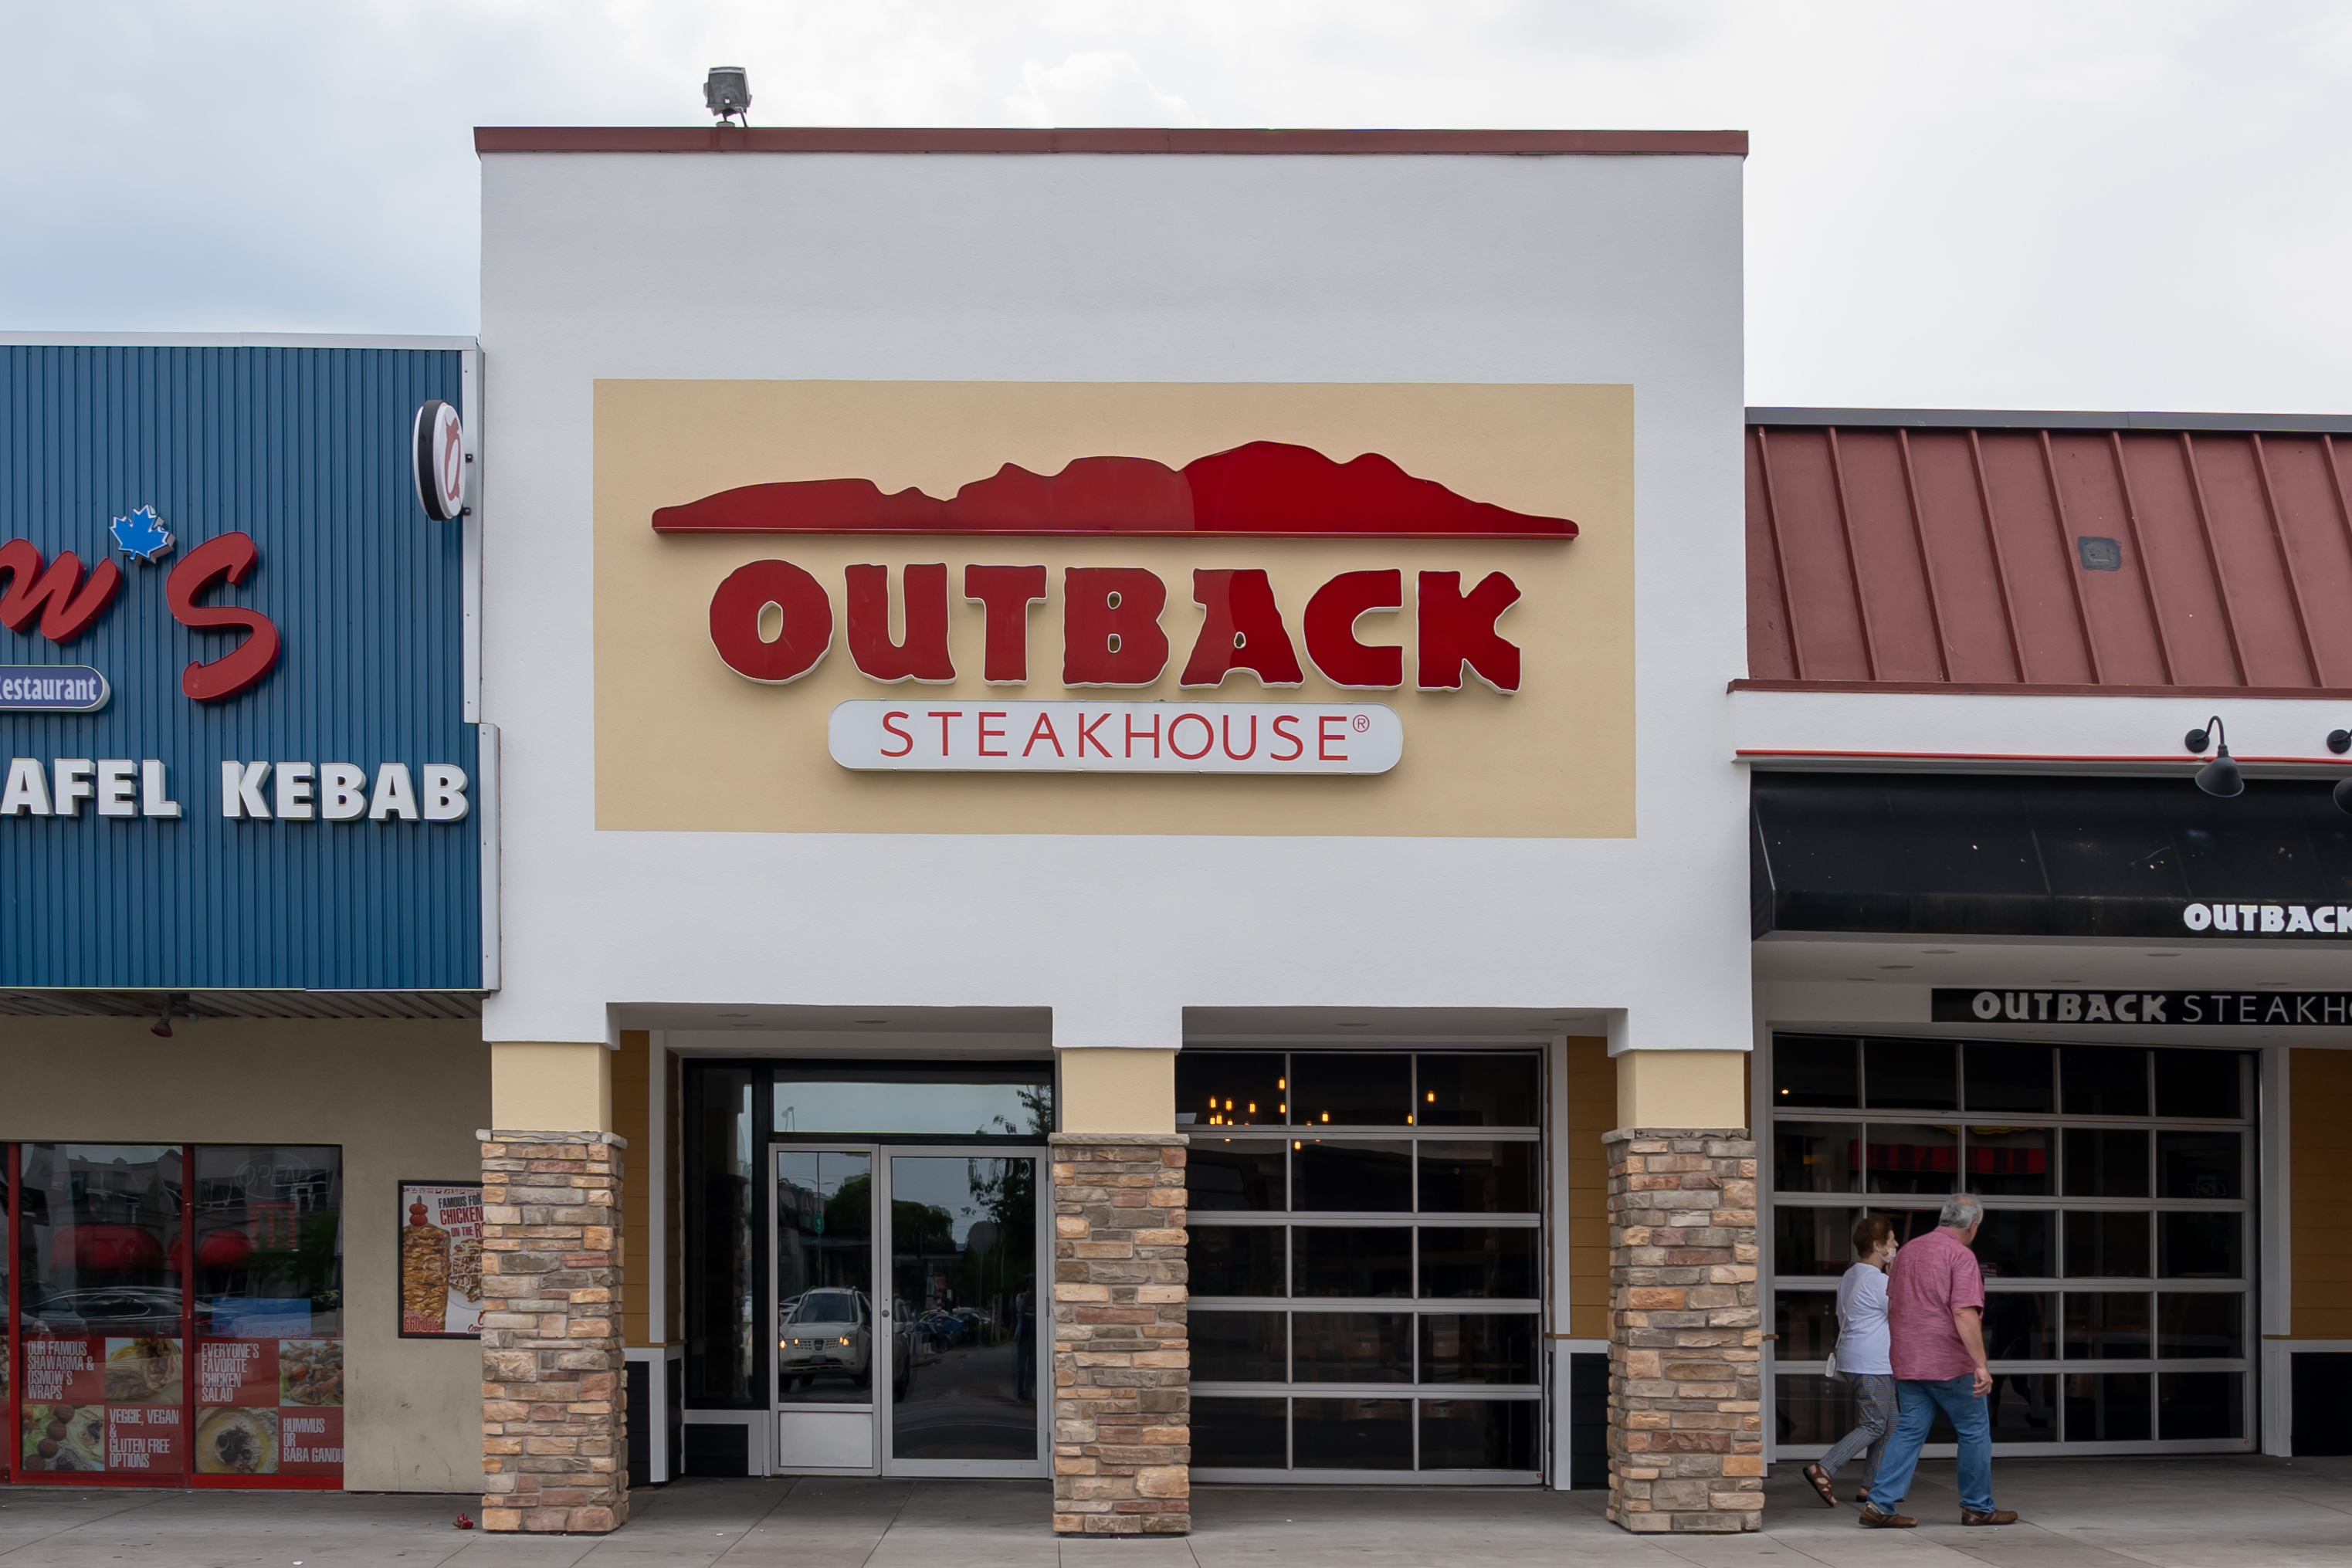 Facade of Outback Steakhouse with two people walking by, suitable for a travel dining feature